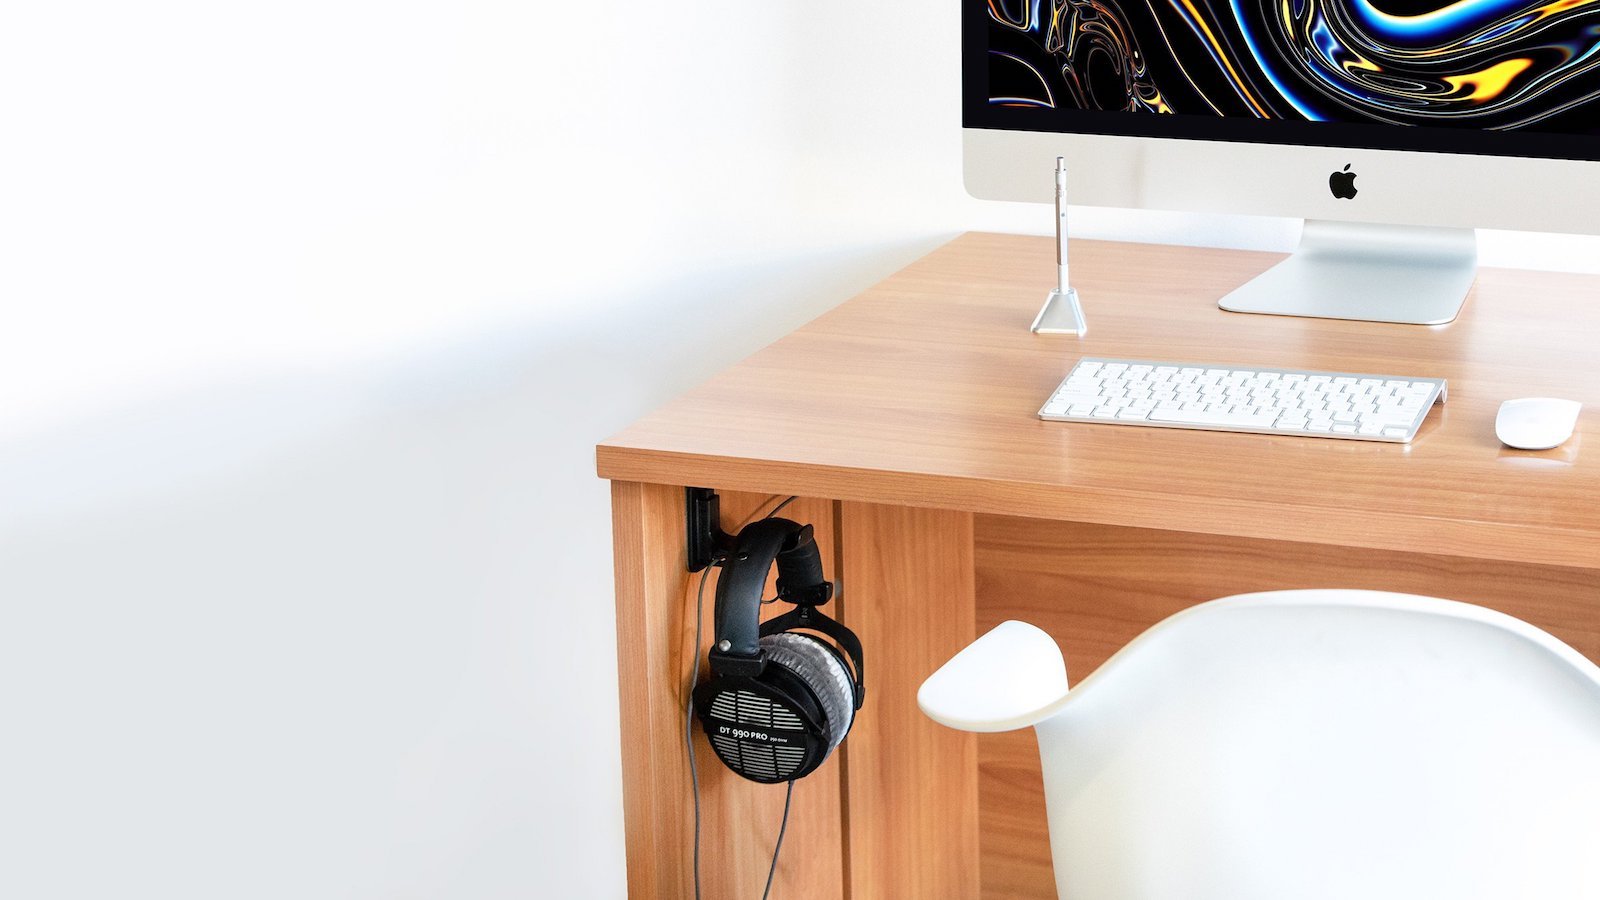 ElevationLab Anchor Side headphone rest mounts to vertical surfaces